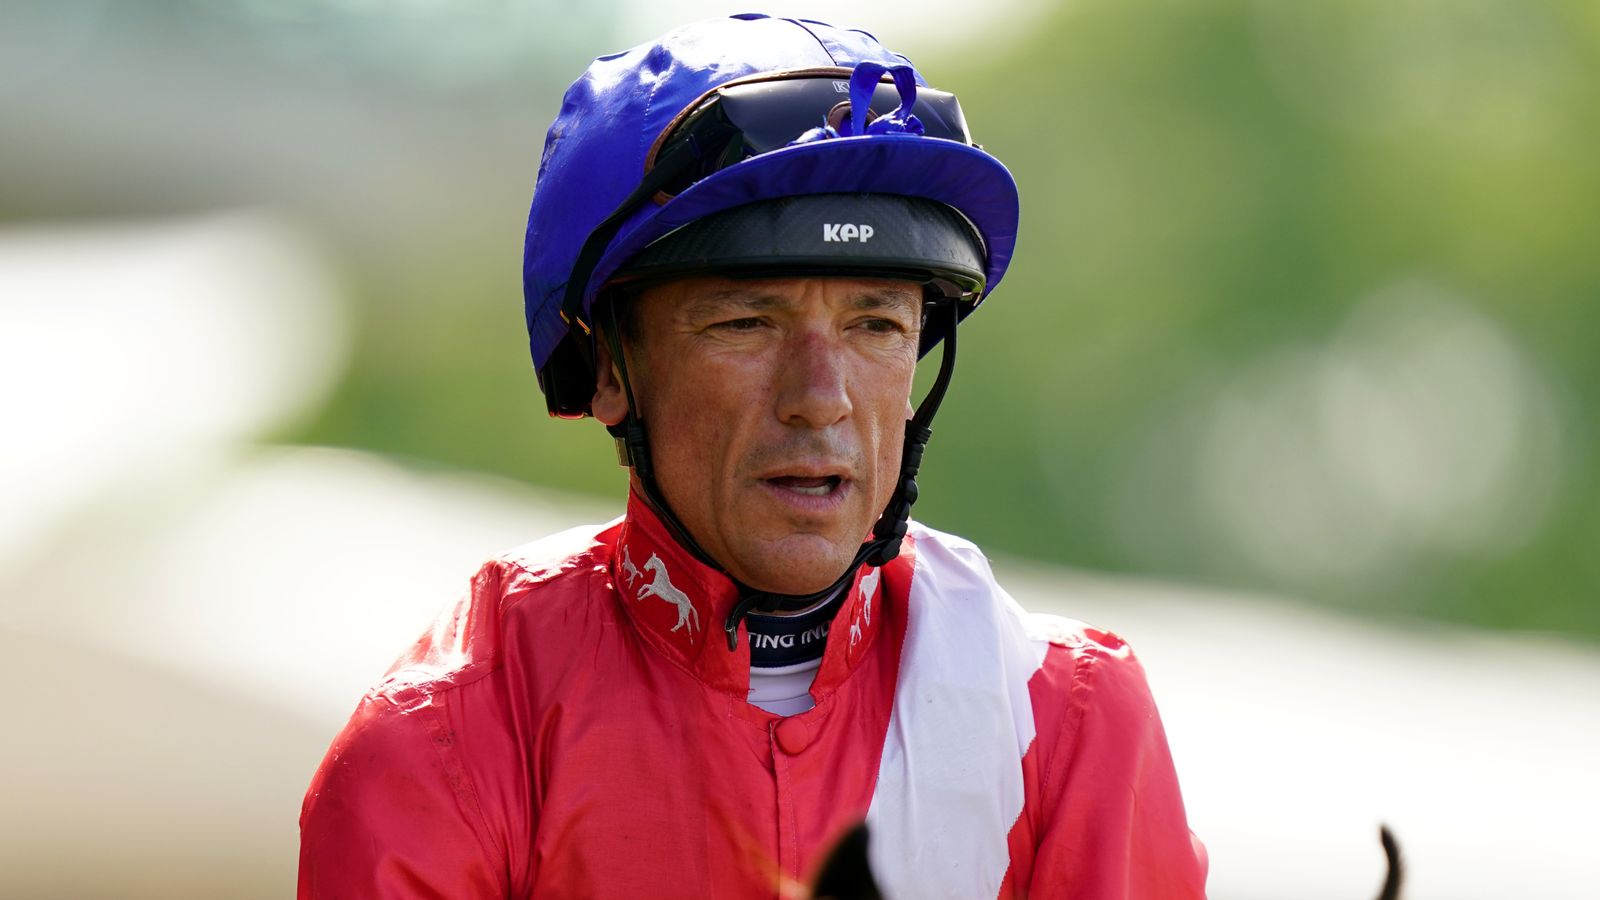 Frankie Dettori and John Gosden agree to ‘amicable sabbatical’ after Newmarket meeting